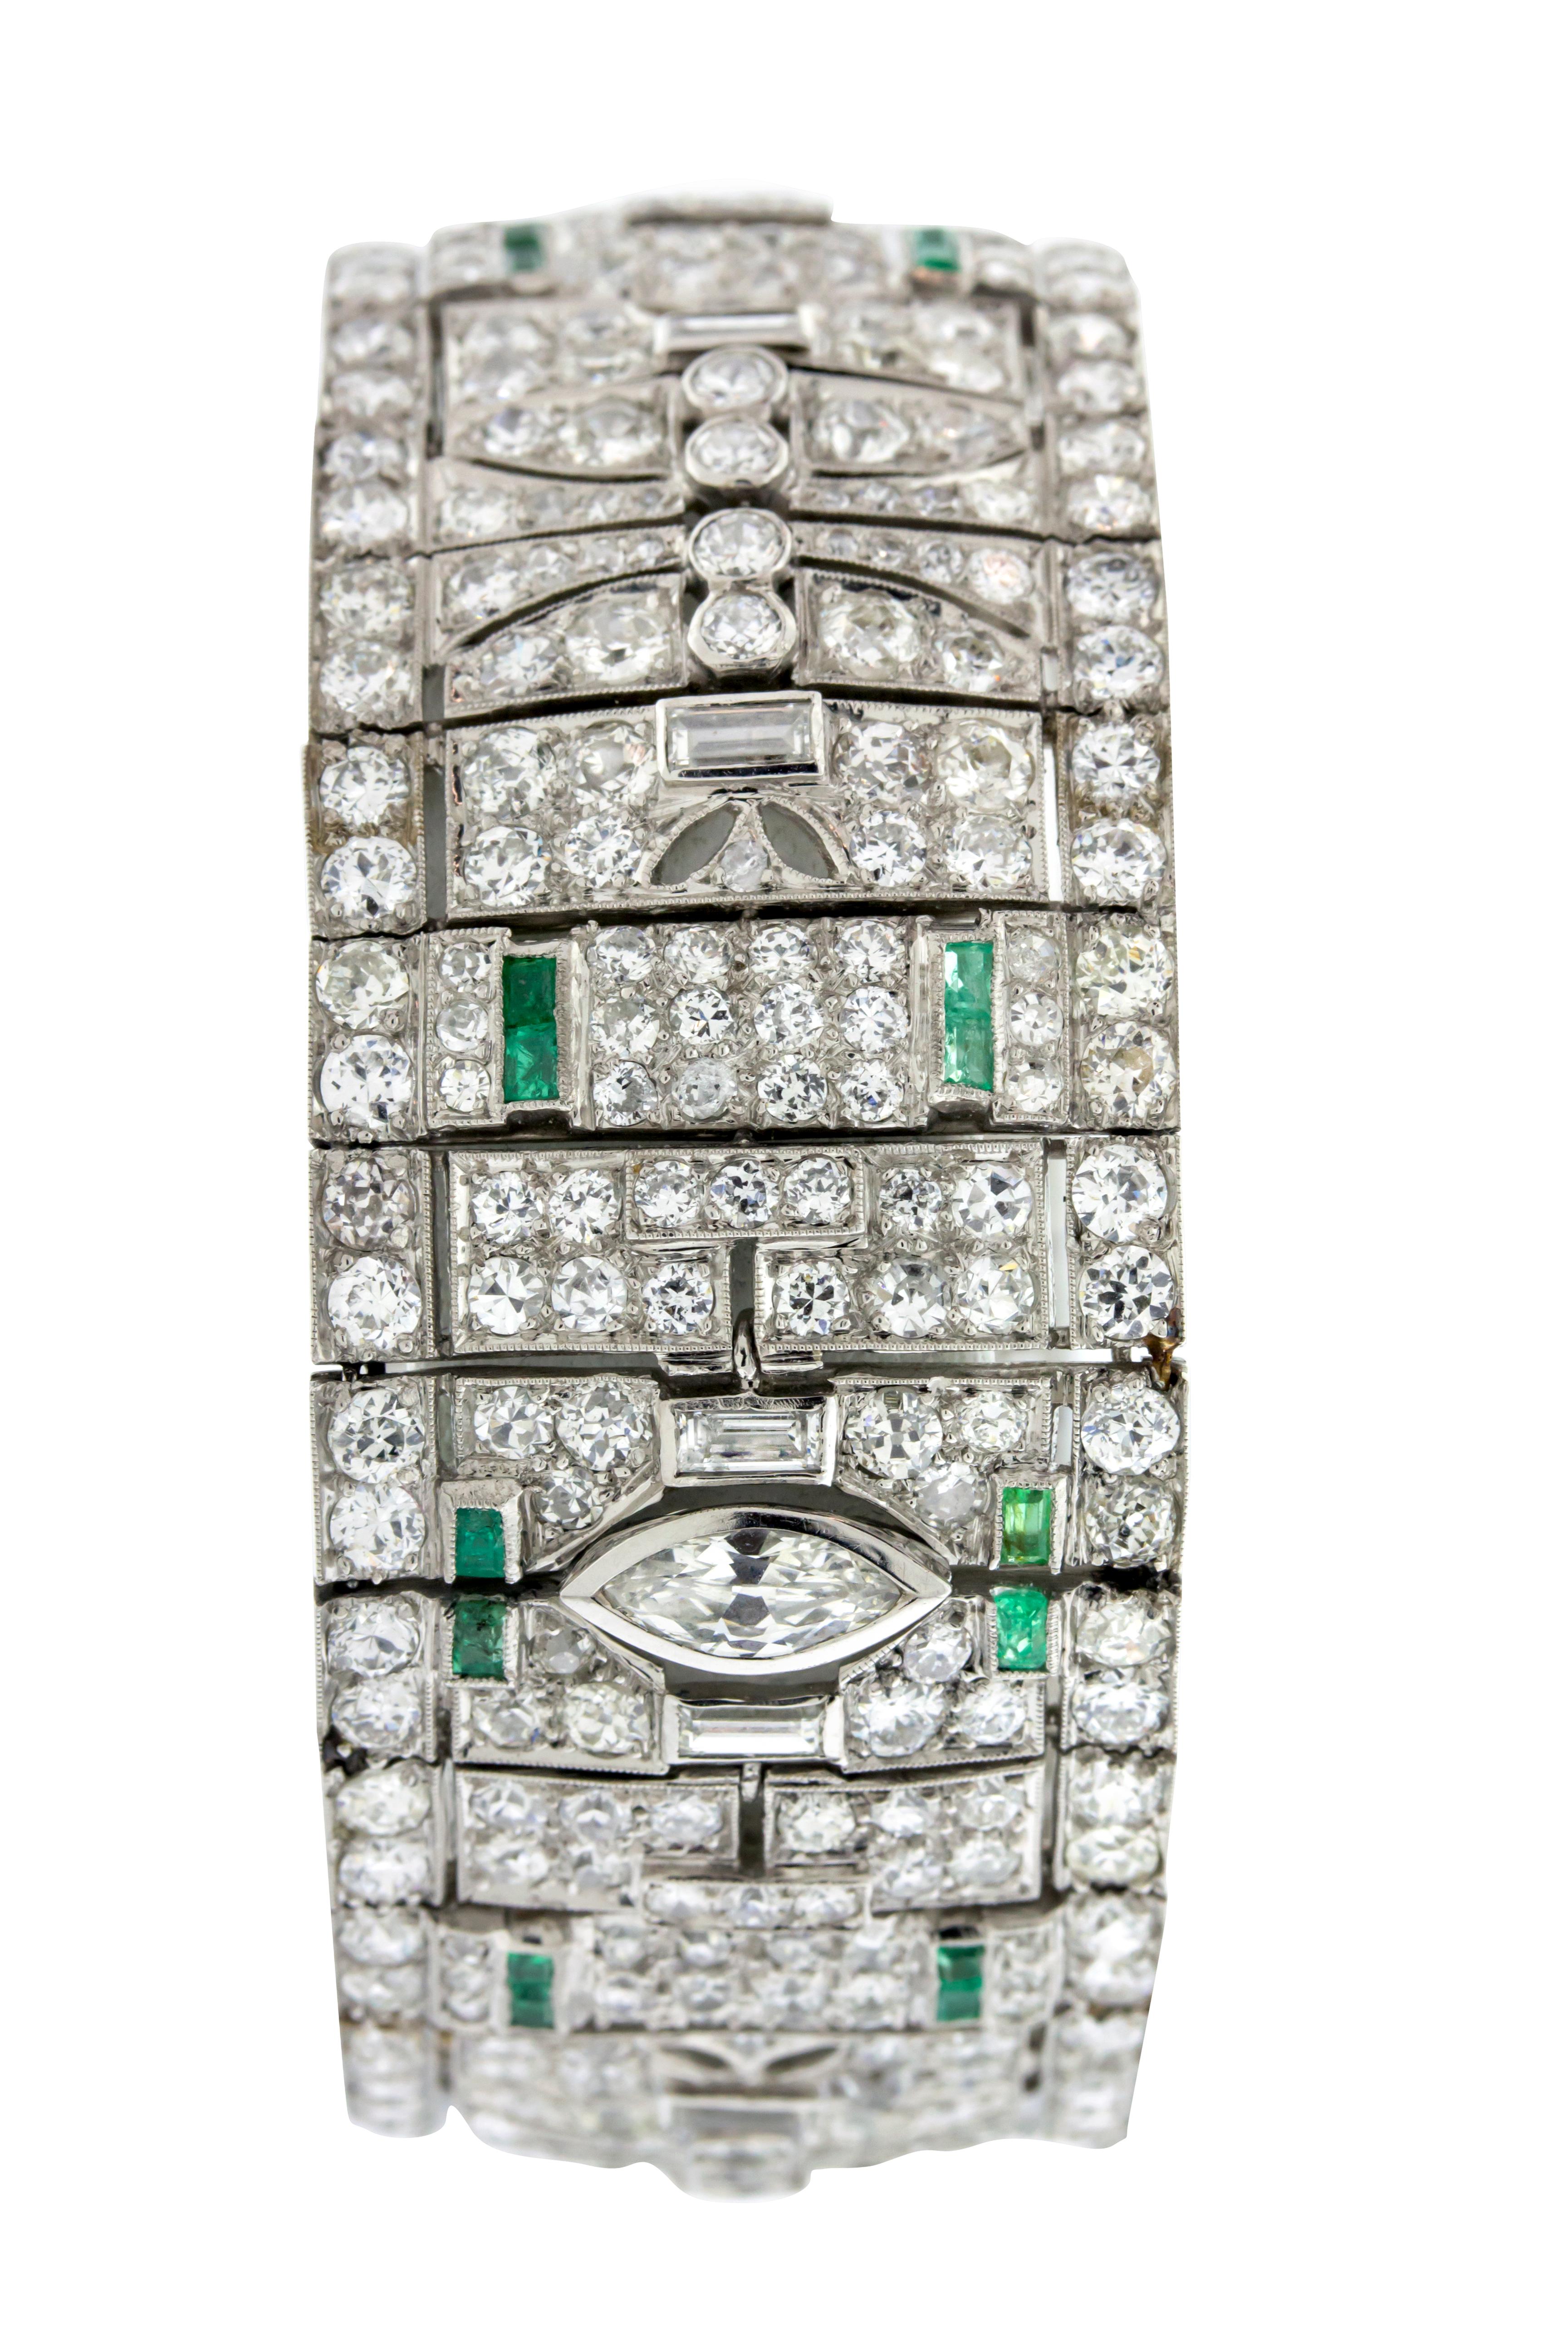 Diamond and Emerald Art Deco style bracelet circa 1930. Approximately 21 carats of mixed cut diamonds, G-H VS-I1, 1 carat emerald set in Platinum. 7 inch length, and 2.5 inches wide with a total weight of 72.8g total weight. Includes GAL